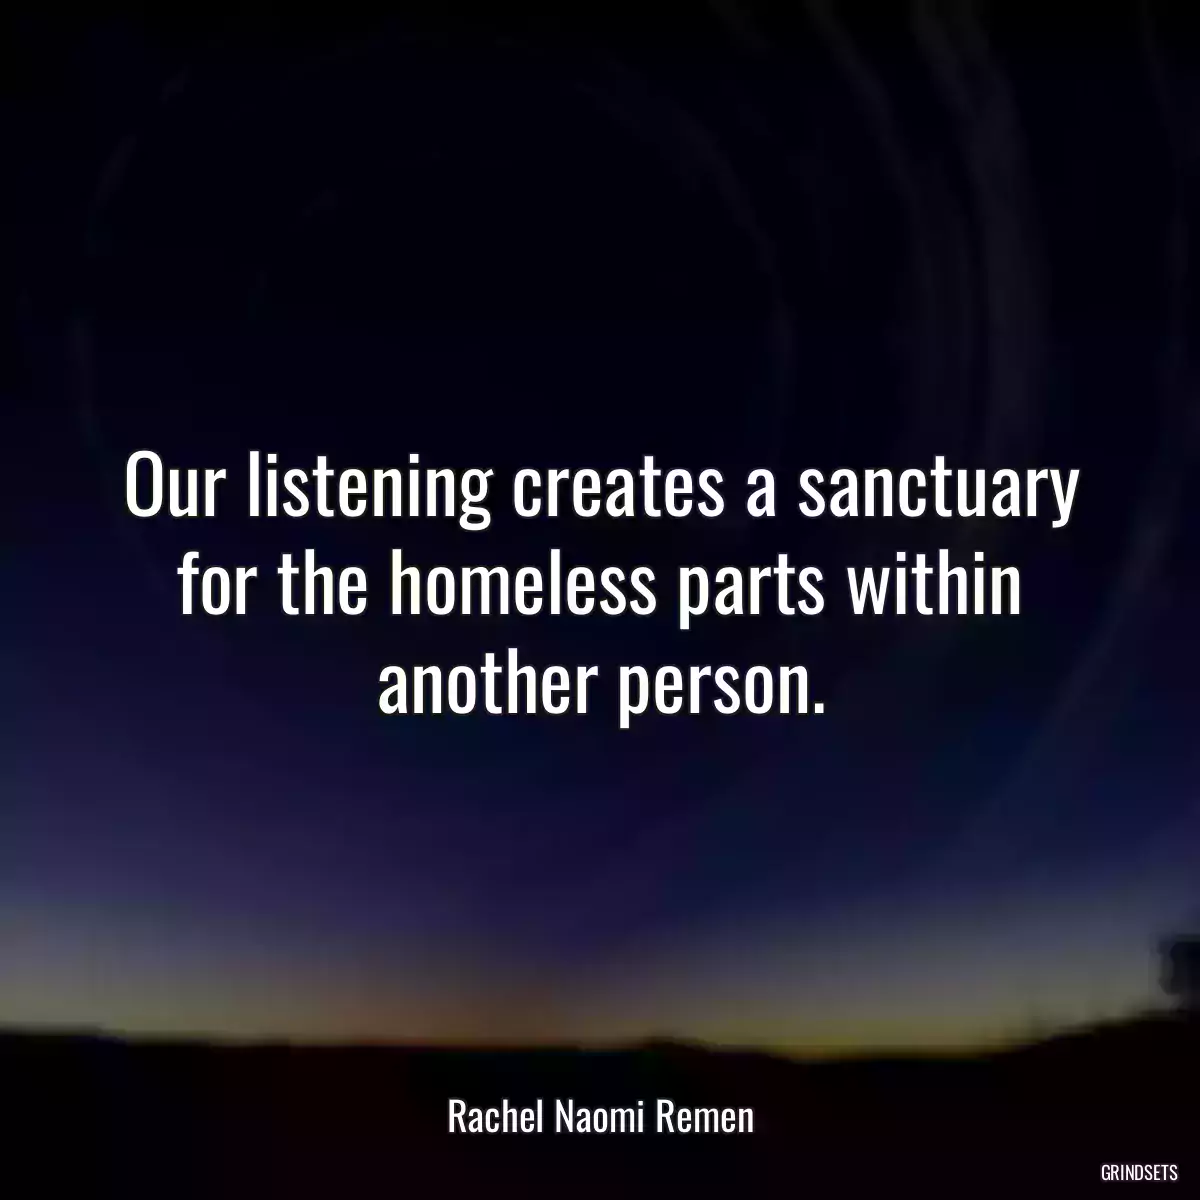 Our listening creates a sanctuary for the homeless parts within another person.